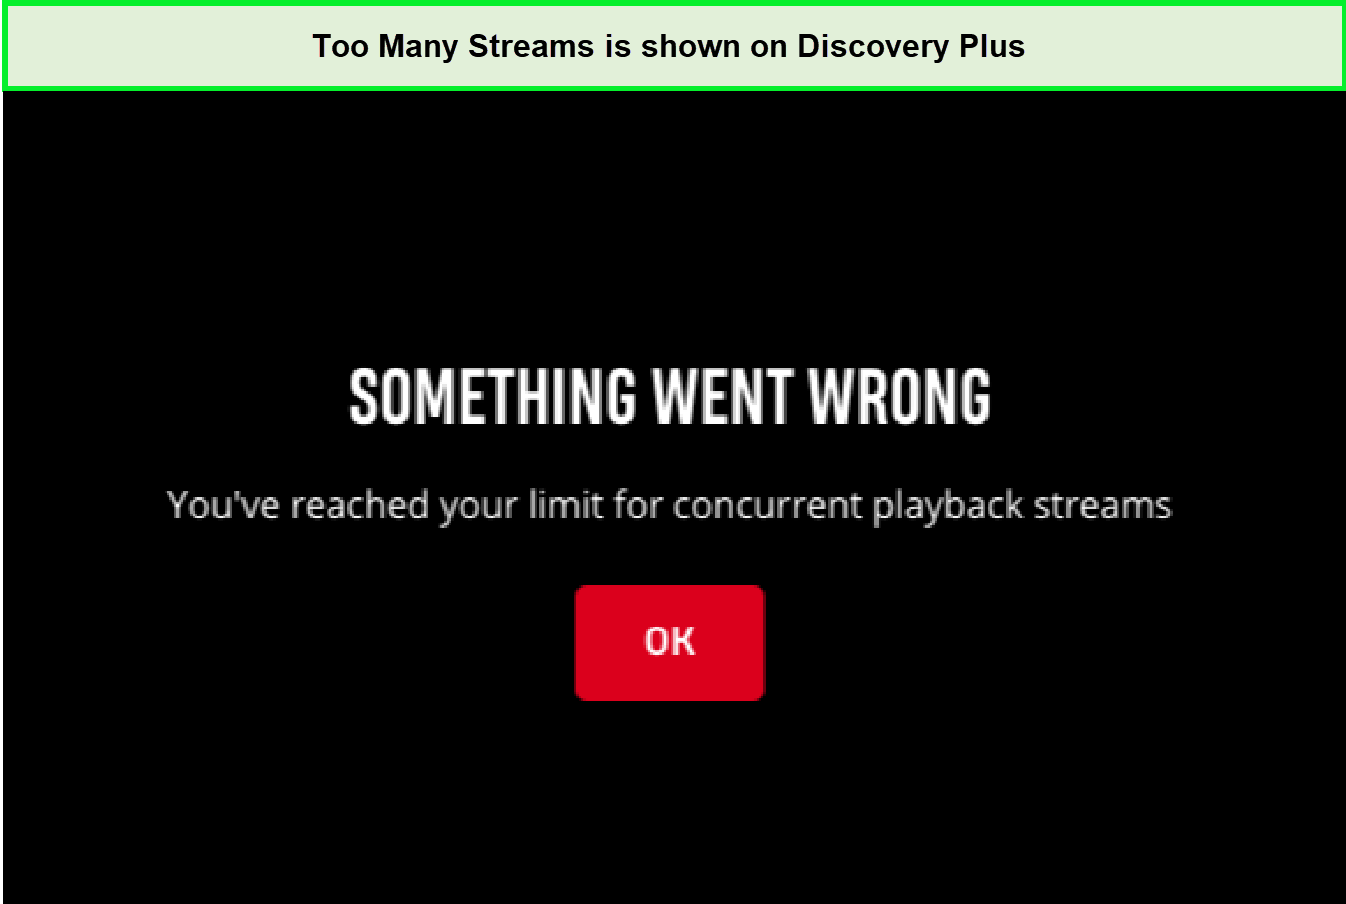 discovery-plus-too-many-streams-error-in-New Zealand